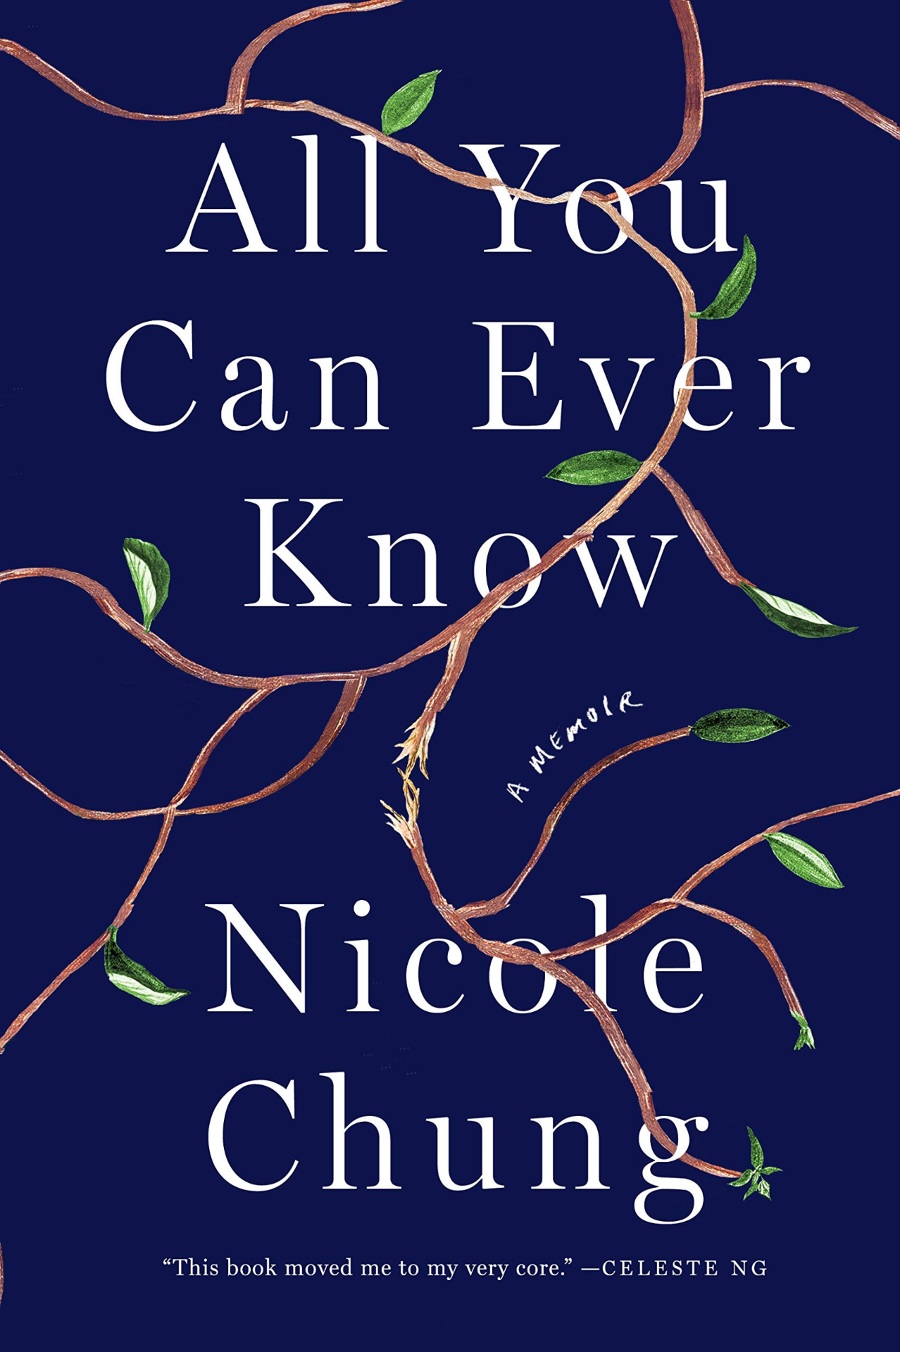 all you can ever know book